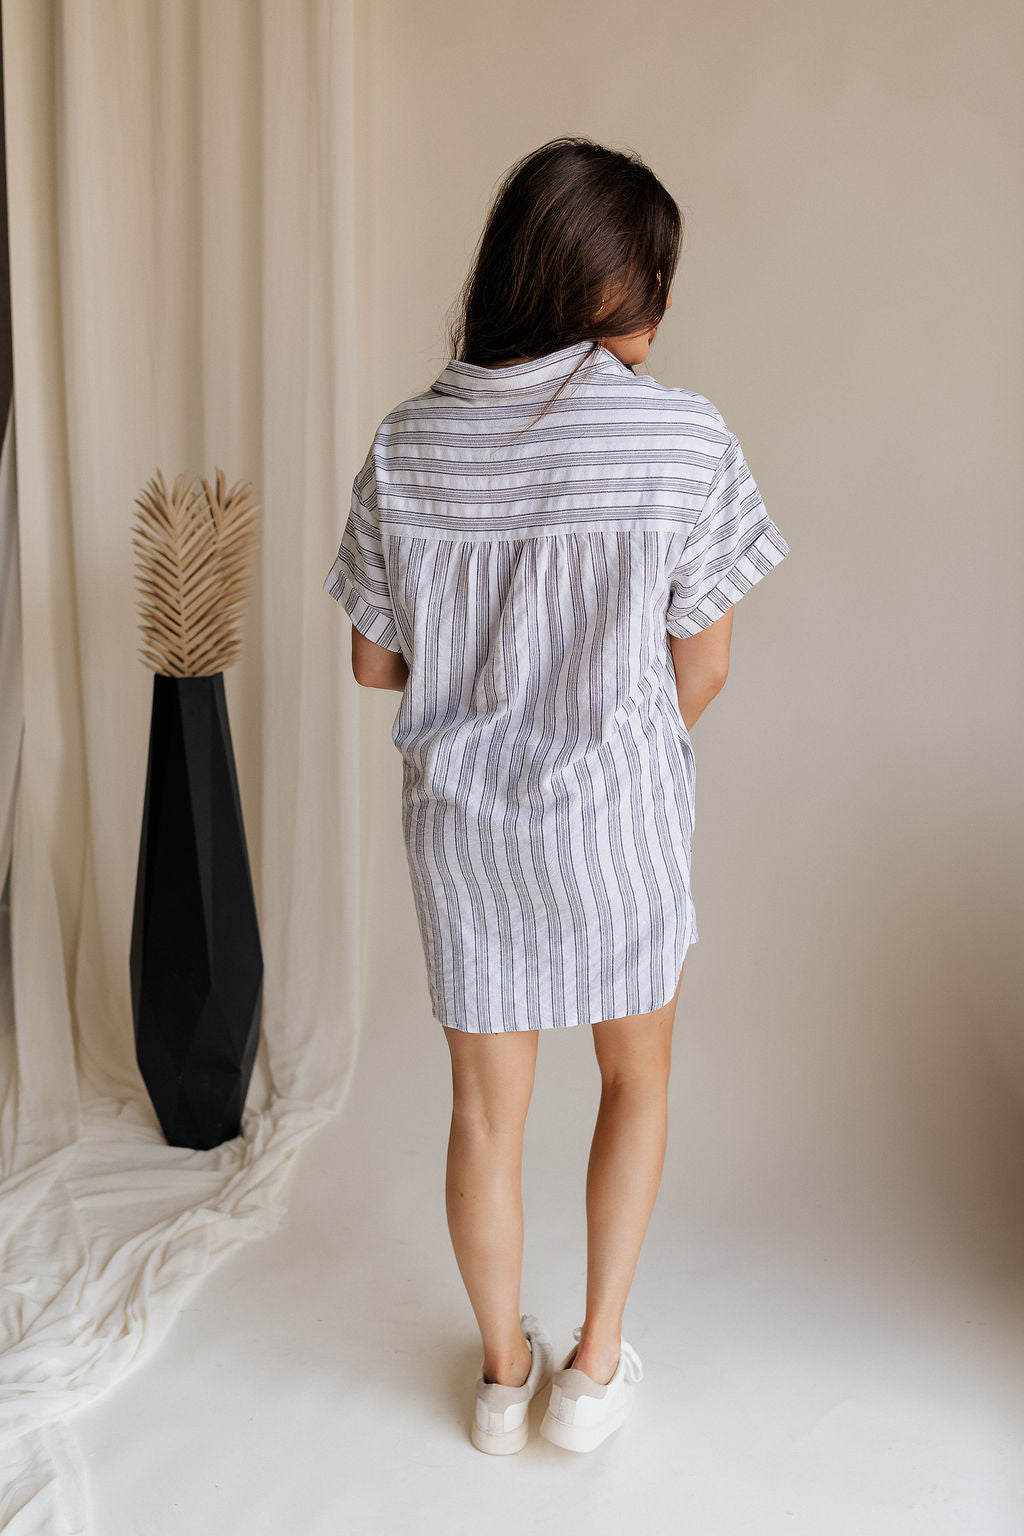 Full body back view of female model wearing the Jenna White & Black Striped Mini Dress that has white fabric with vertical black stripes, a front pocket, button up front, short sleeves, and collar.